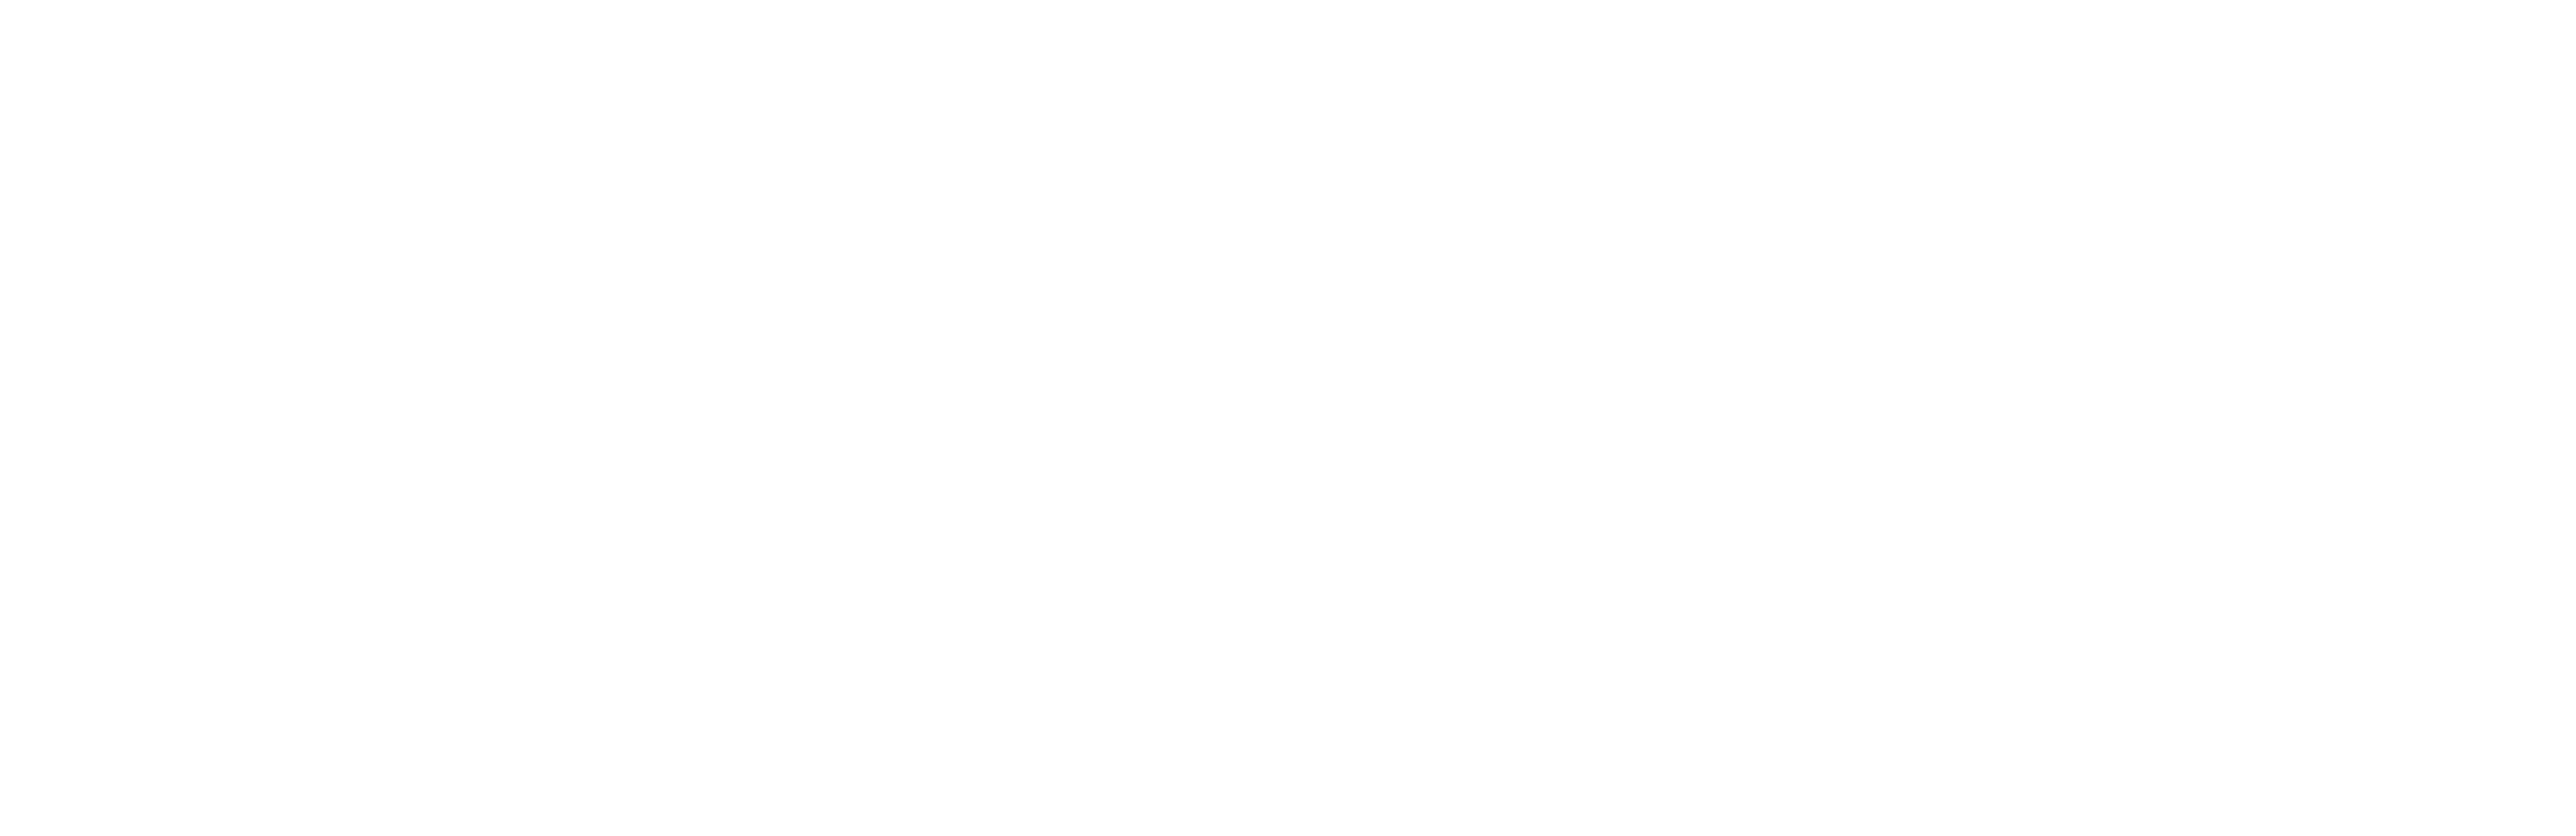 90 Day Fiancé: Before the 90 Days logo